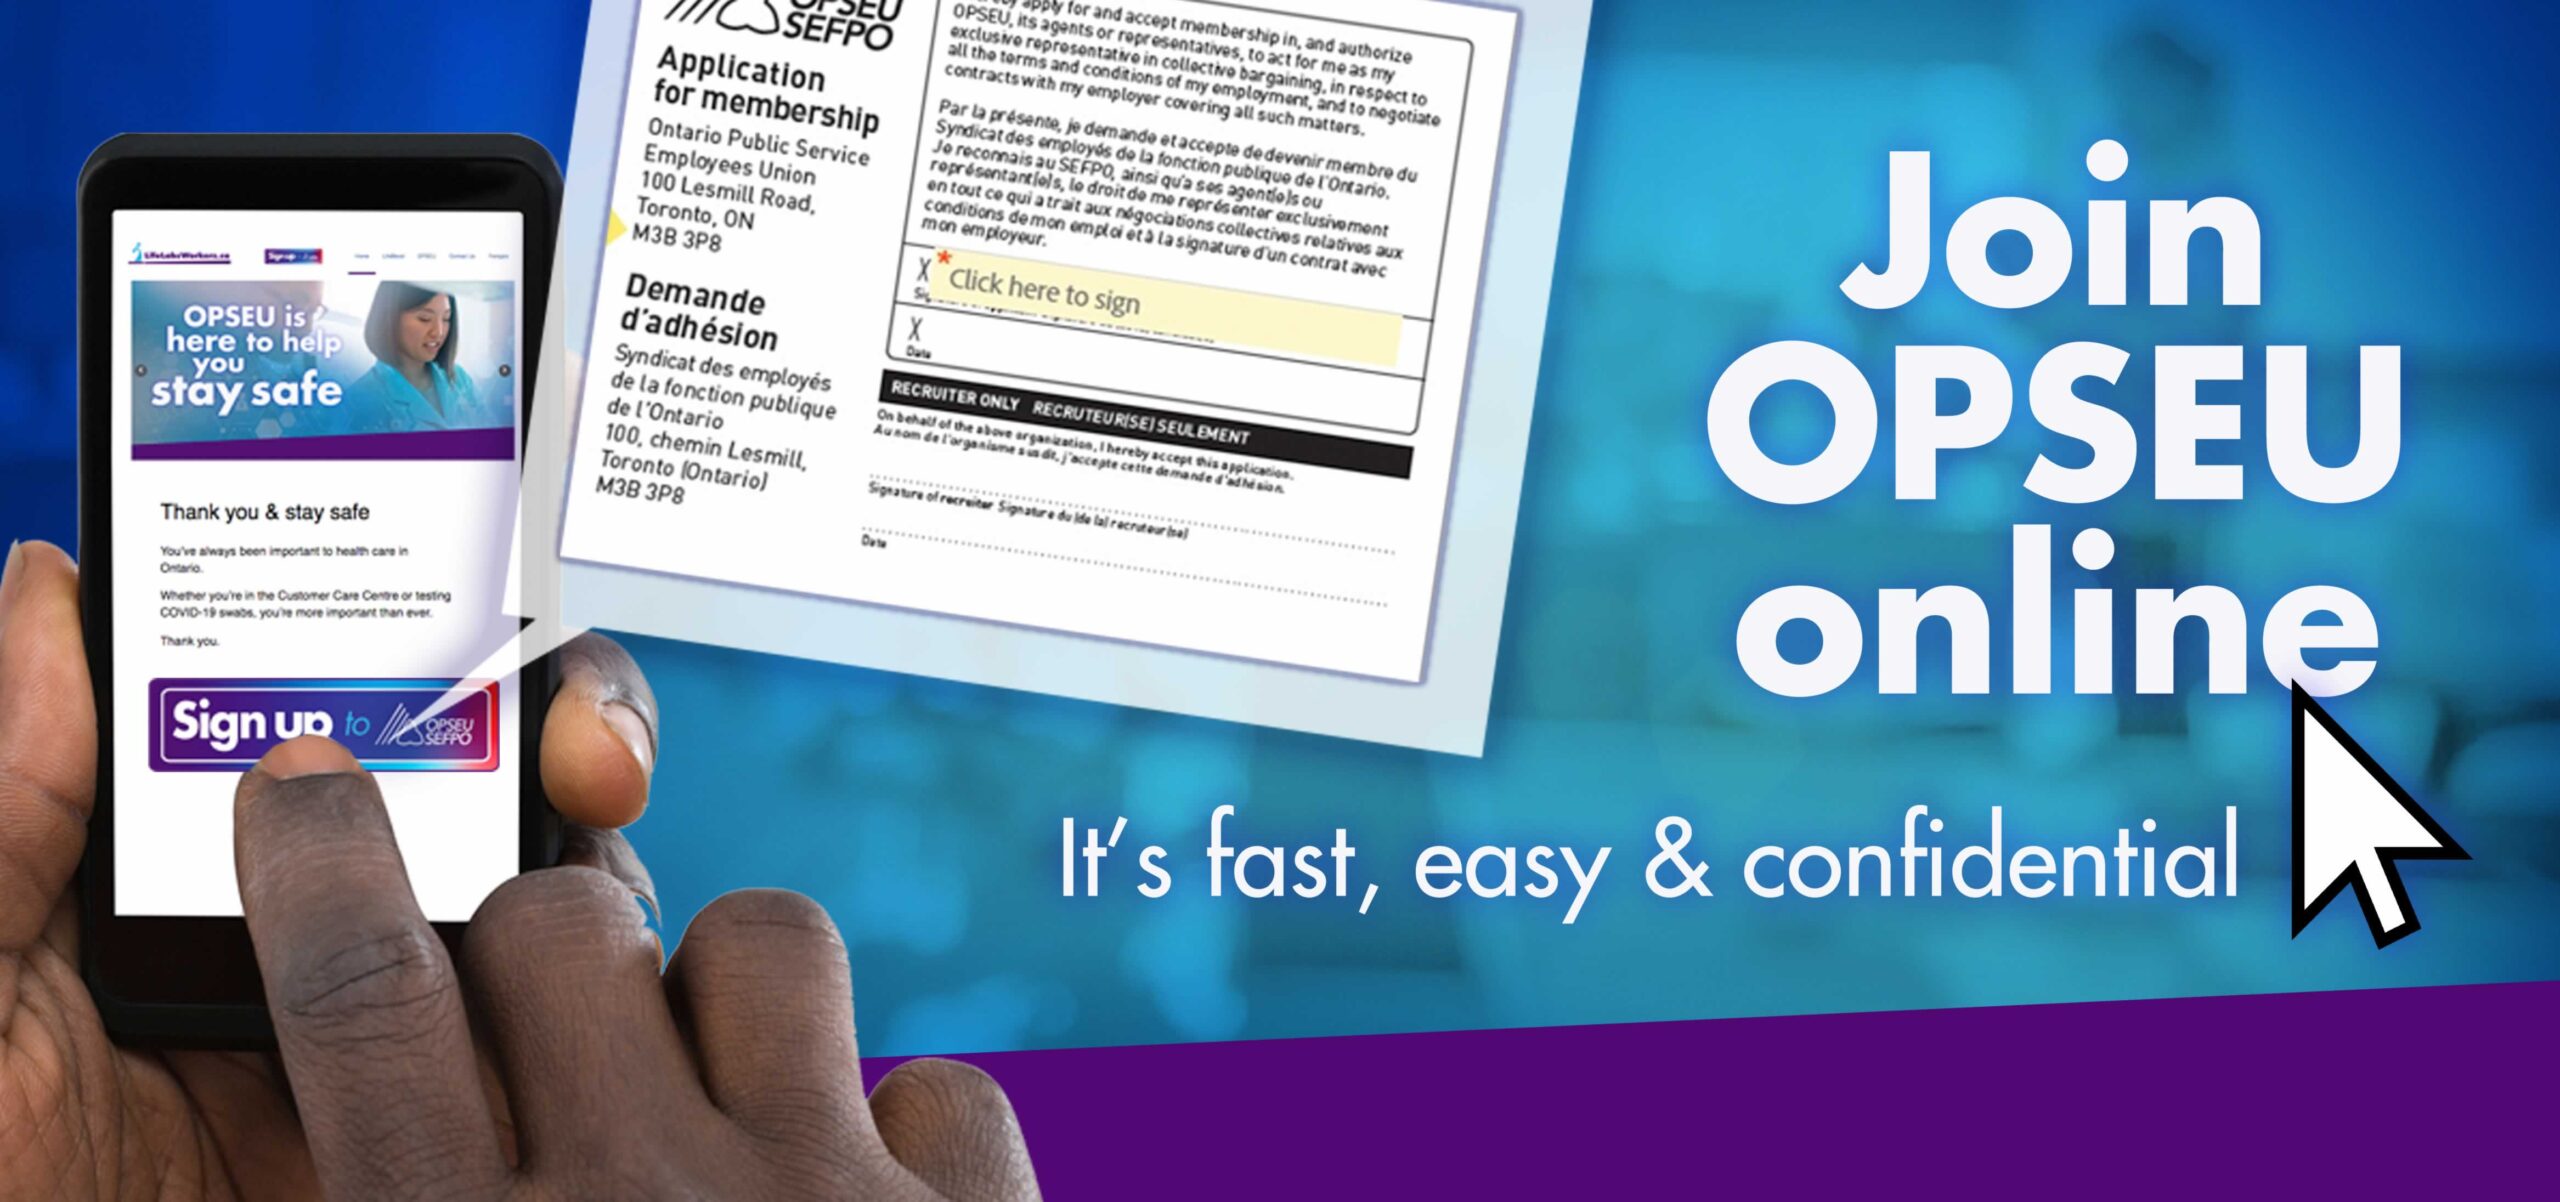 Join OPSEU online, it's fast and easy